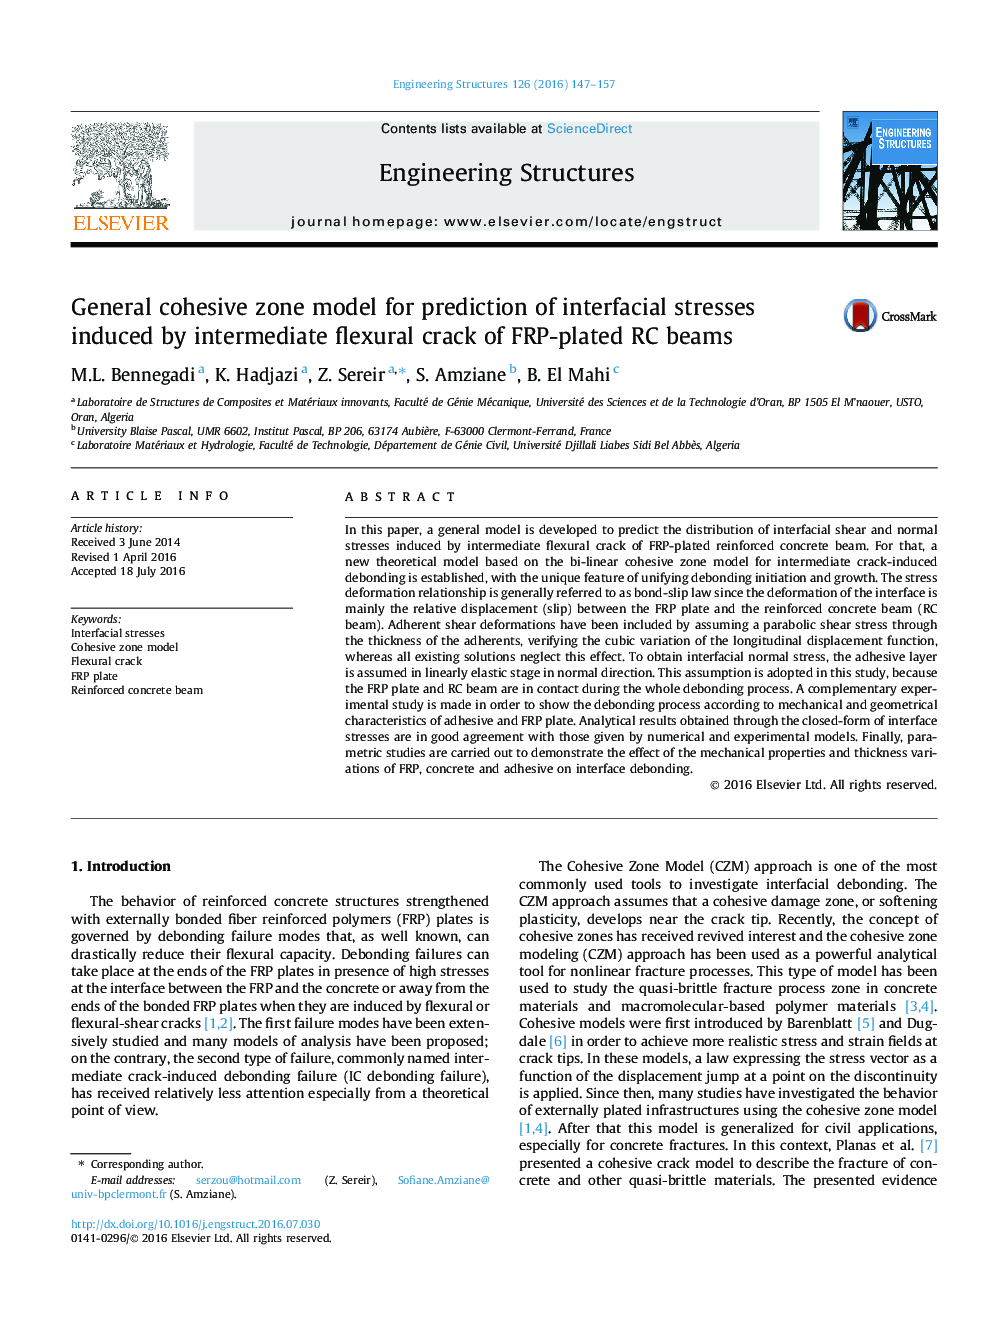 General cohesive zone model for prediction of interfacial stresses induced by intermediate flexural crack of FRP-plated RC beams